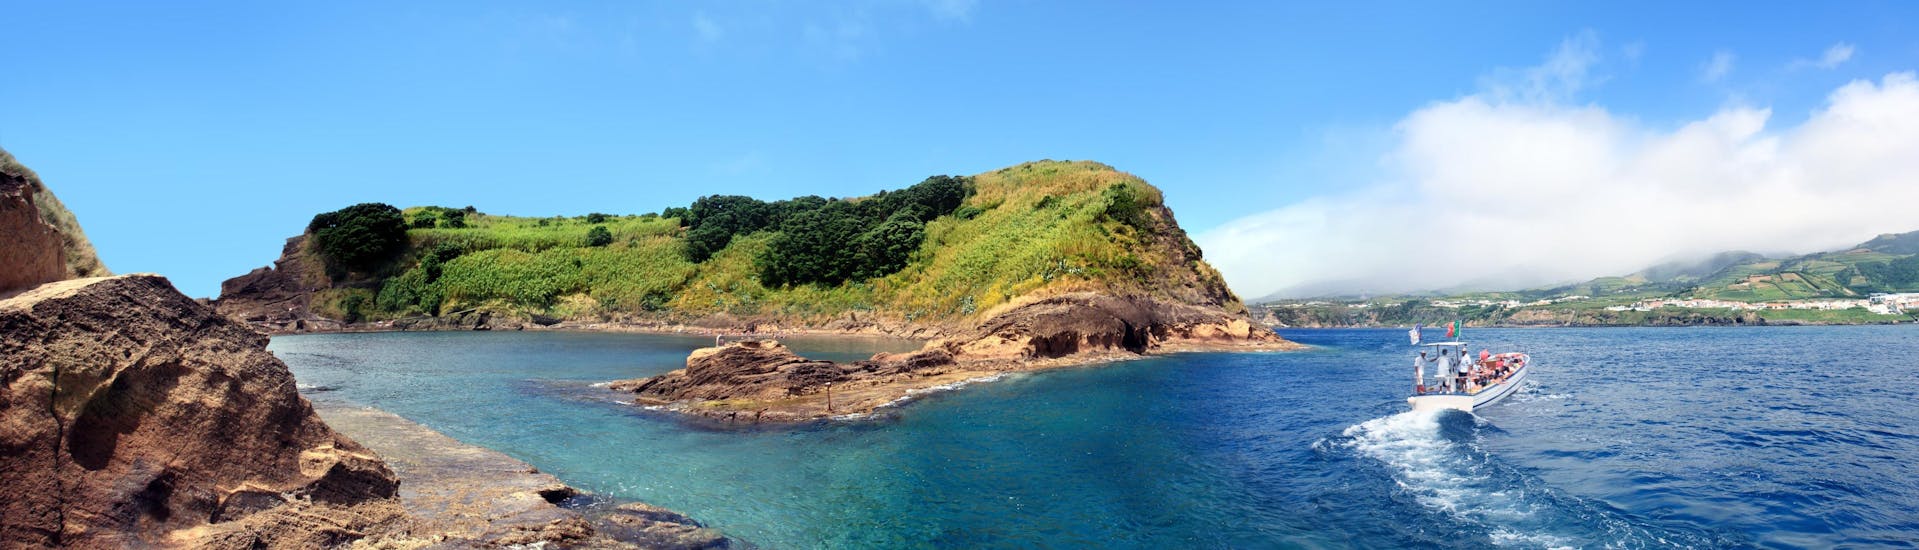 View of the islet of Vila Franca do Campo, a popular destination for boat trips in Azores.